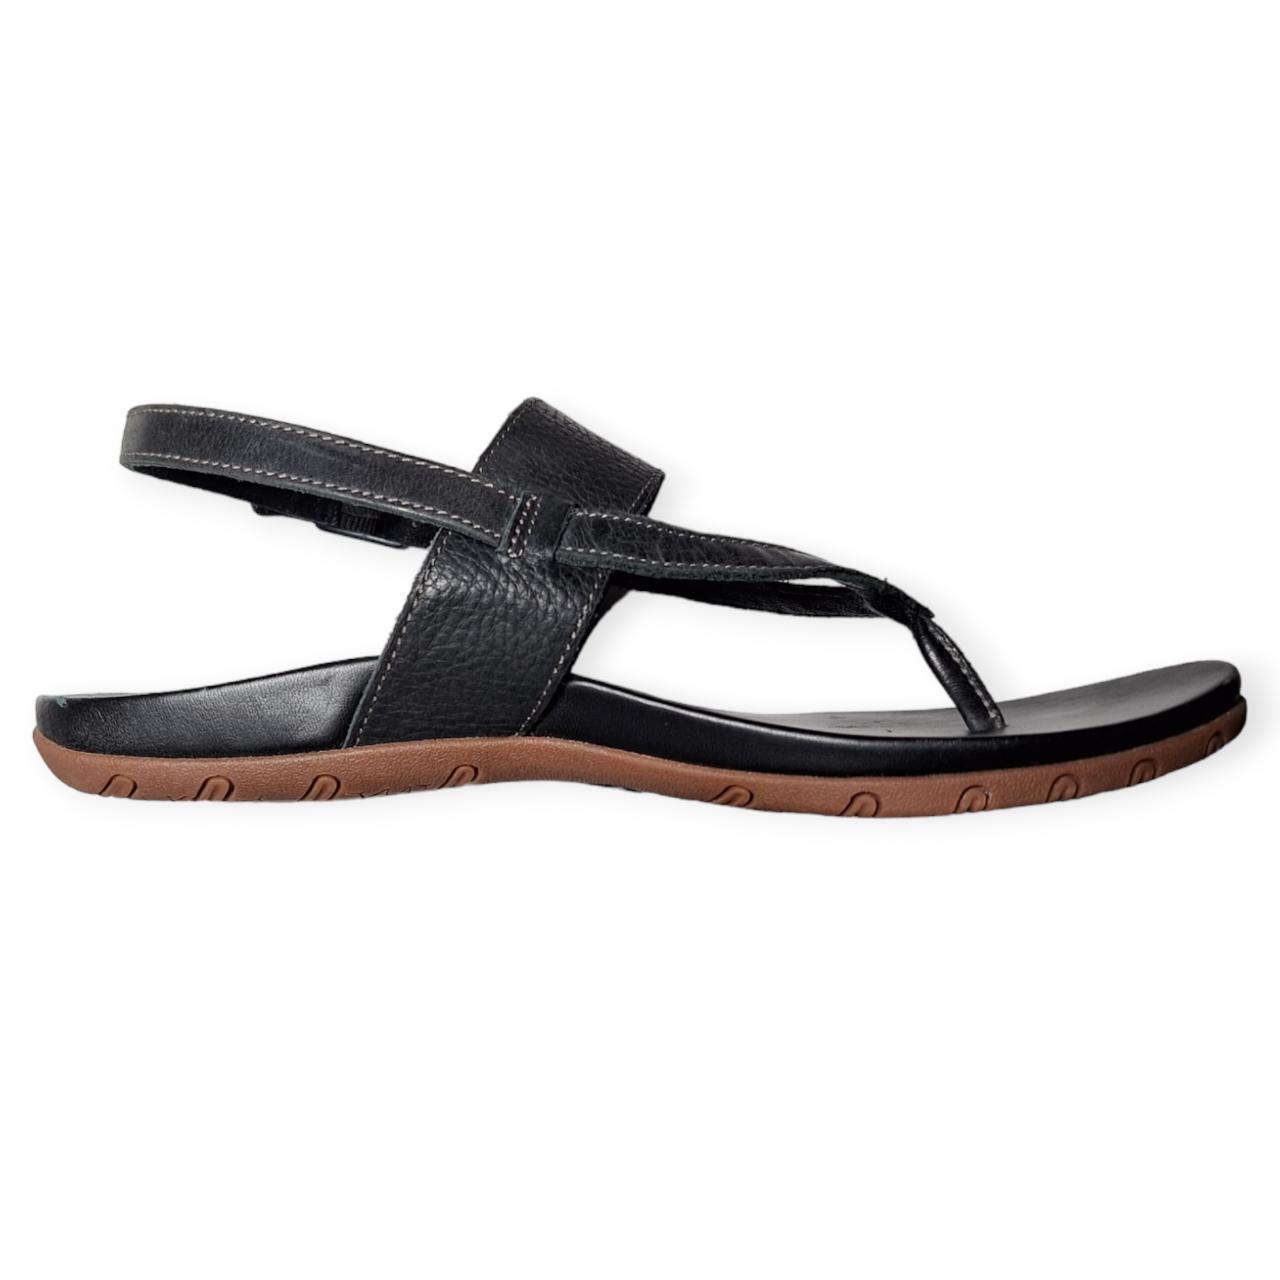 Chaco womens sandals size - Gem